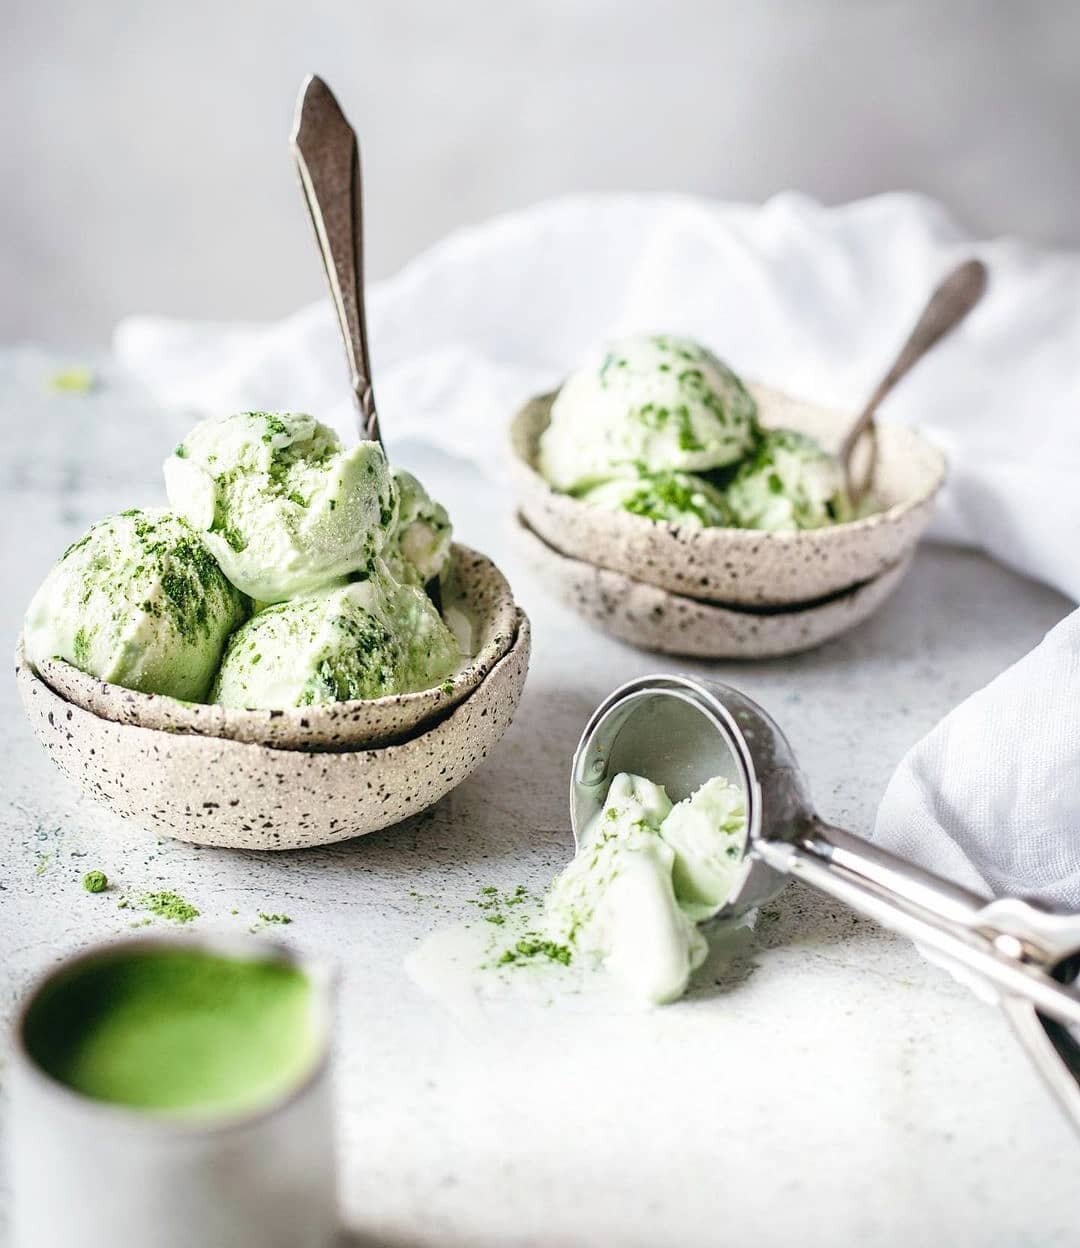 Celebrating National Ice Cream Day today. What flavour is your favourite? 🍨
.
.
.
.
.
Photo: @veggie_intervention
#nationalicecreamday #worldicecreamday #icecream #matchaicecream #veganicecream #vegandessert #icelollies #icecreamrecipe #summertime #